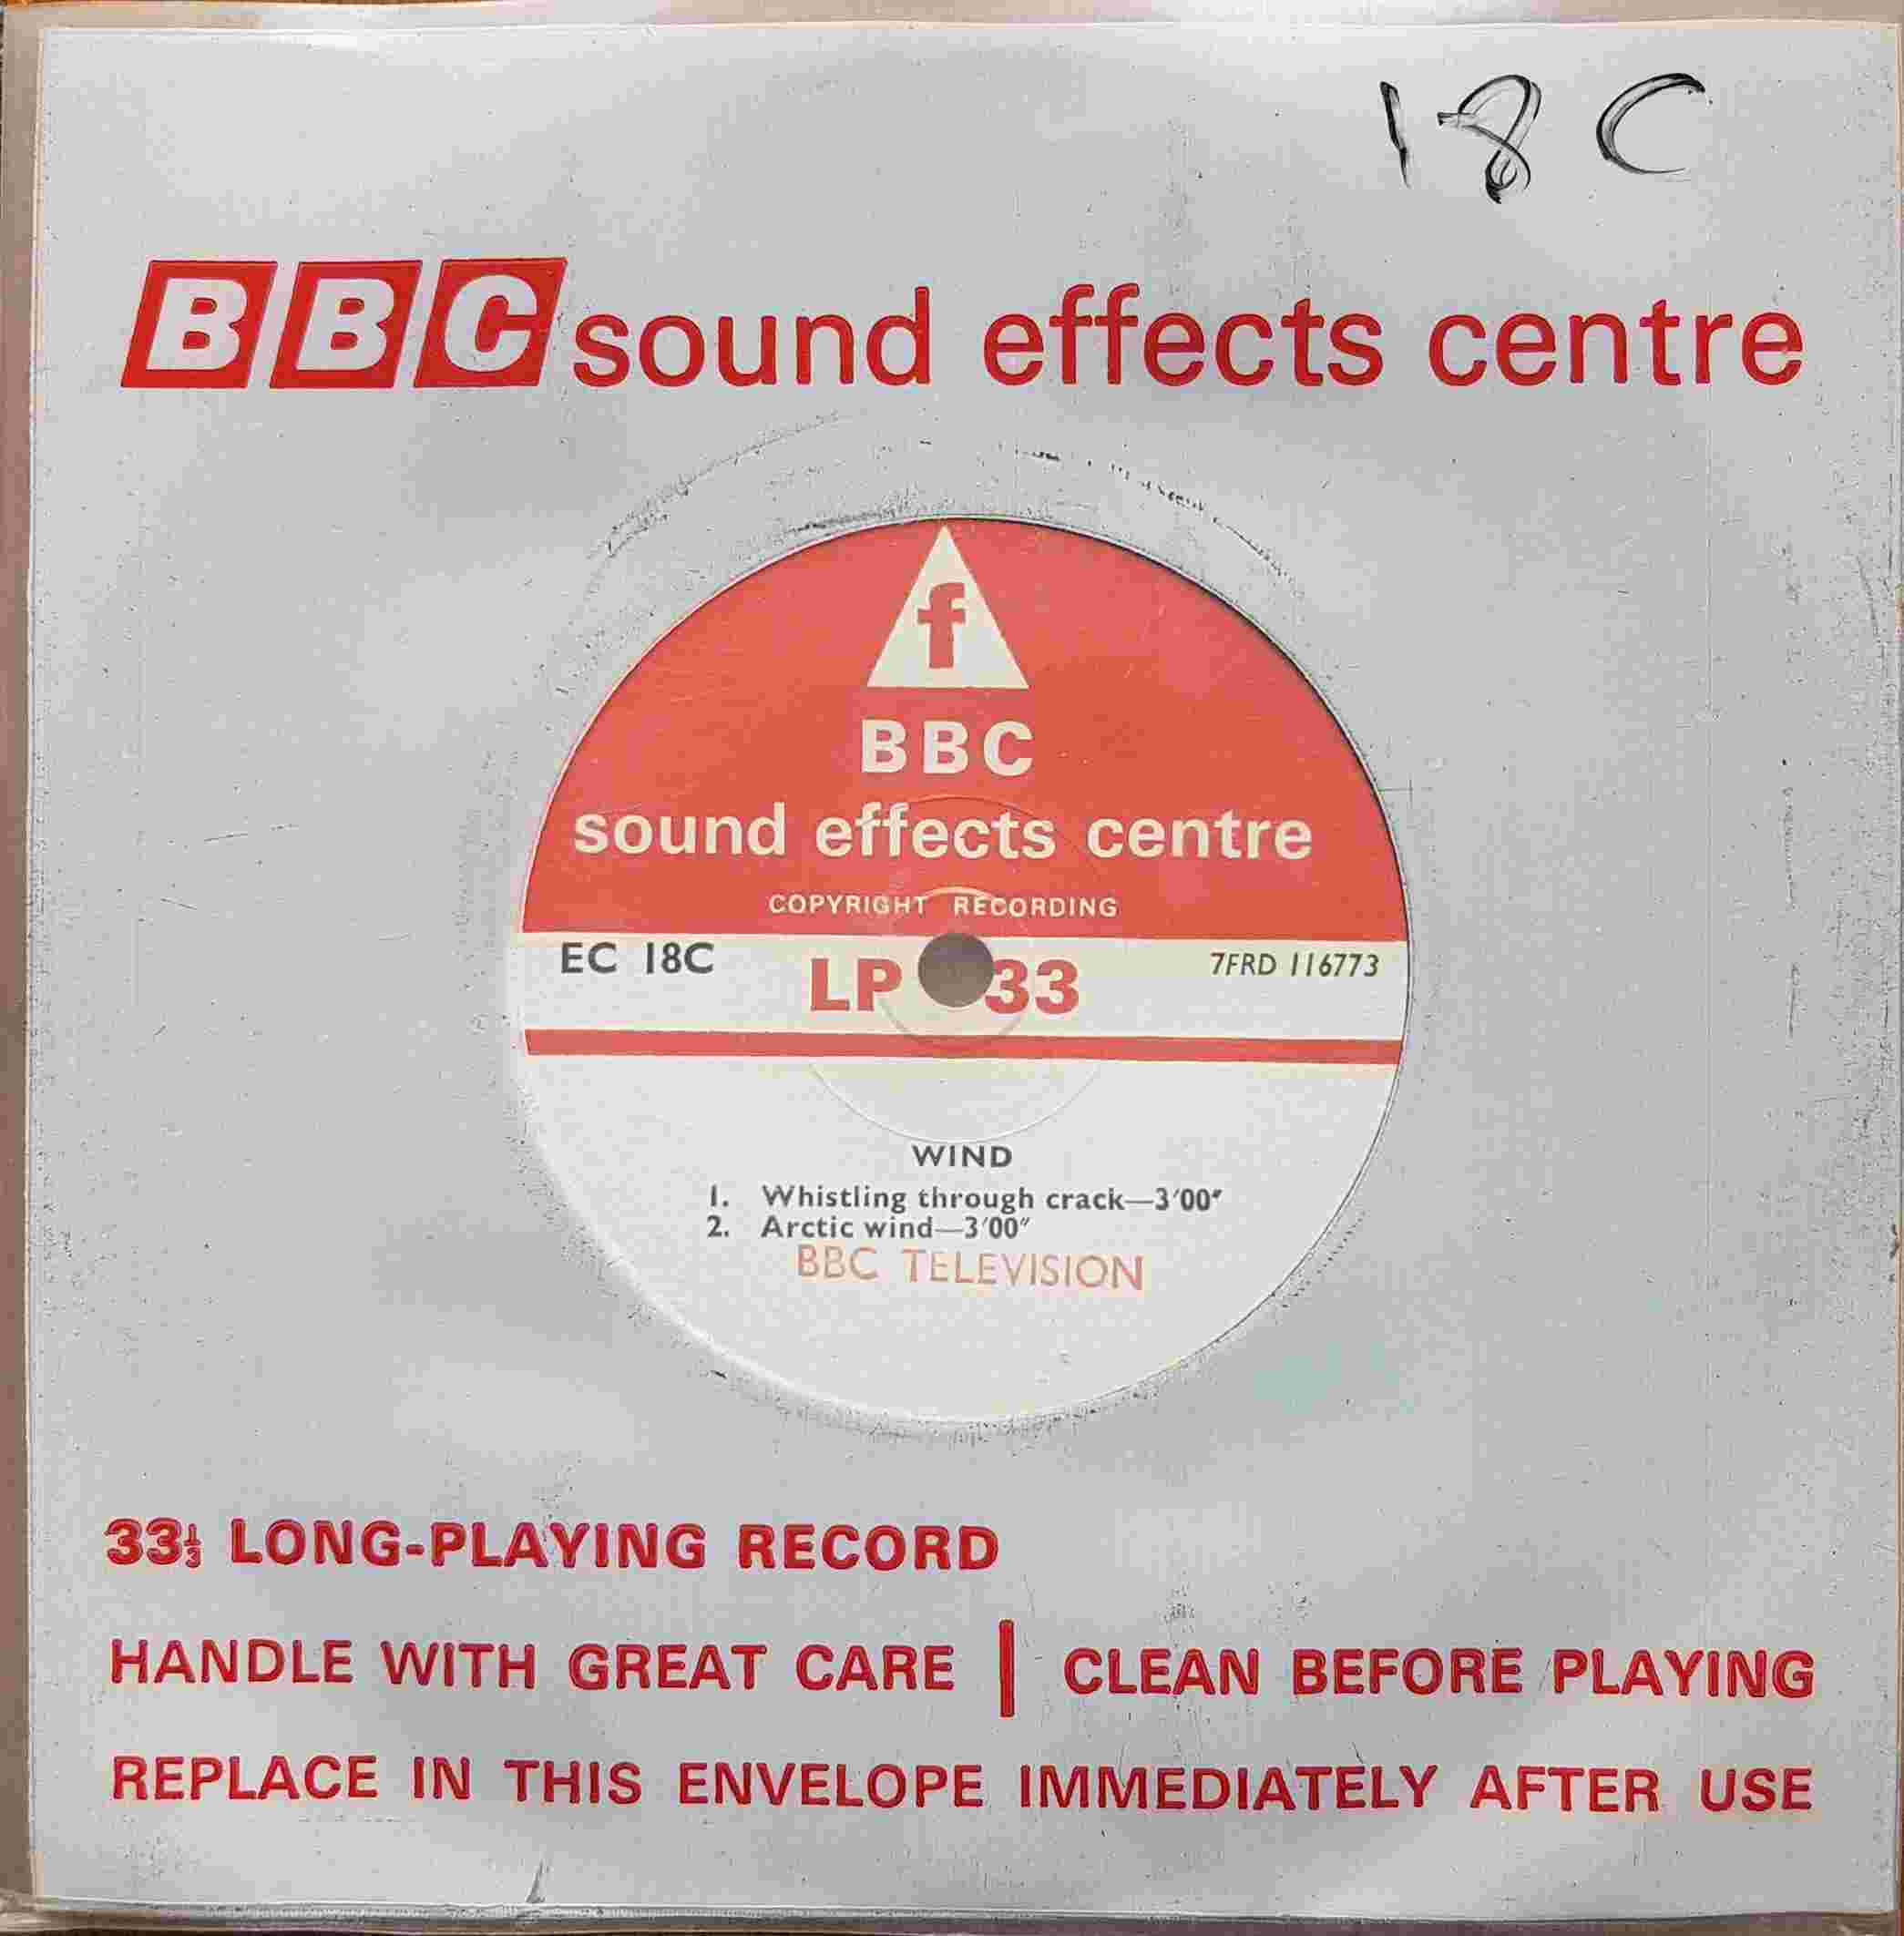 Picture of EC 18C Wind by artist Not registered from the BBC records and Tapes library